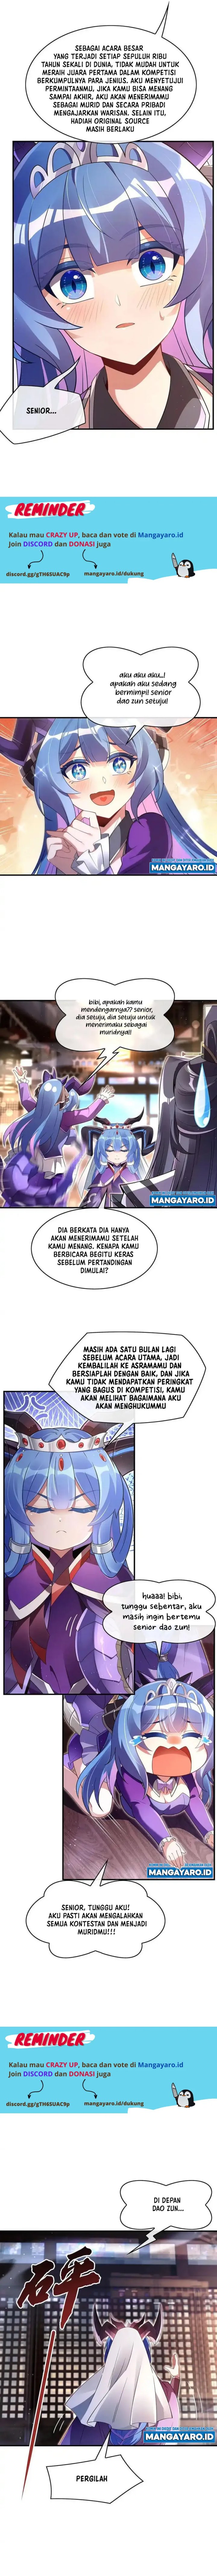 Dilarang COPAS - situs resmi www.mangacanblog.com - Komik my female apprentices are all big shots from the future 277 - chapter 277 278 Indonesia my female apprentices are all big shots from the future 277 - chapter 277 Terbaru 2|Baca Manga Komik Indonesia|Mangacan